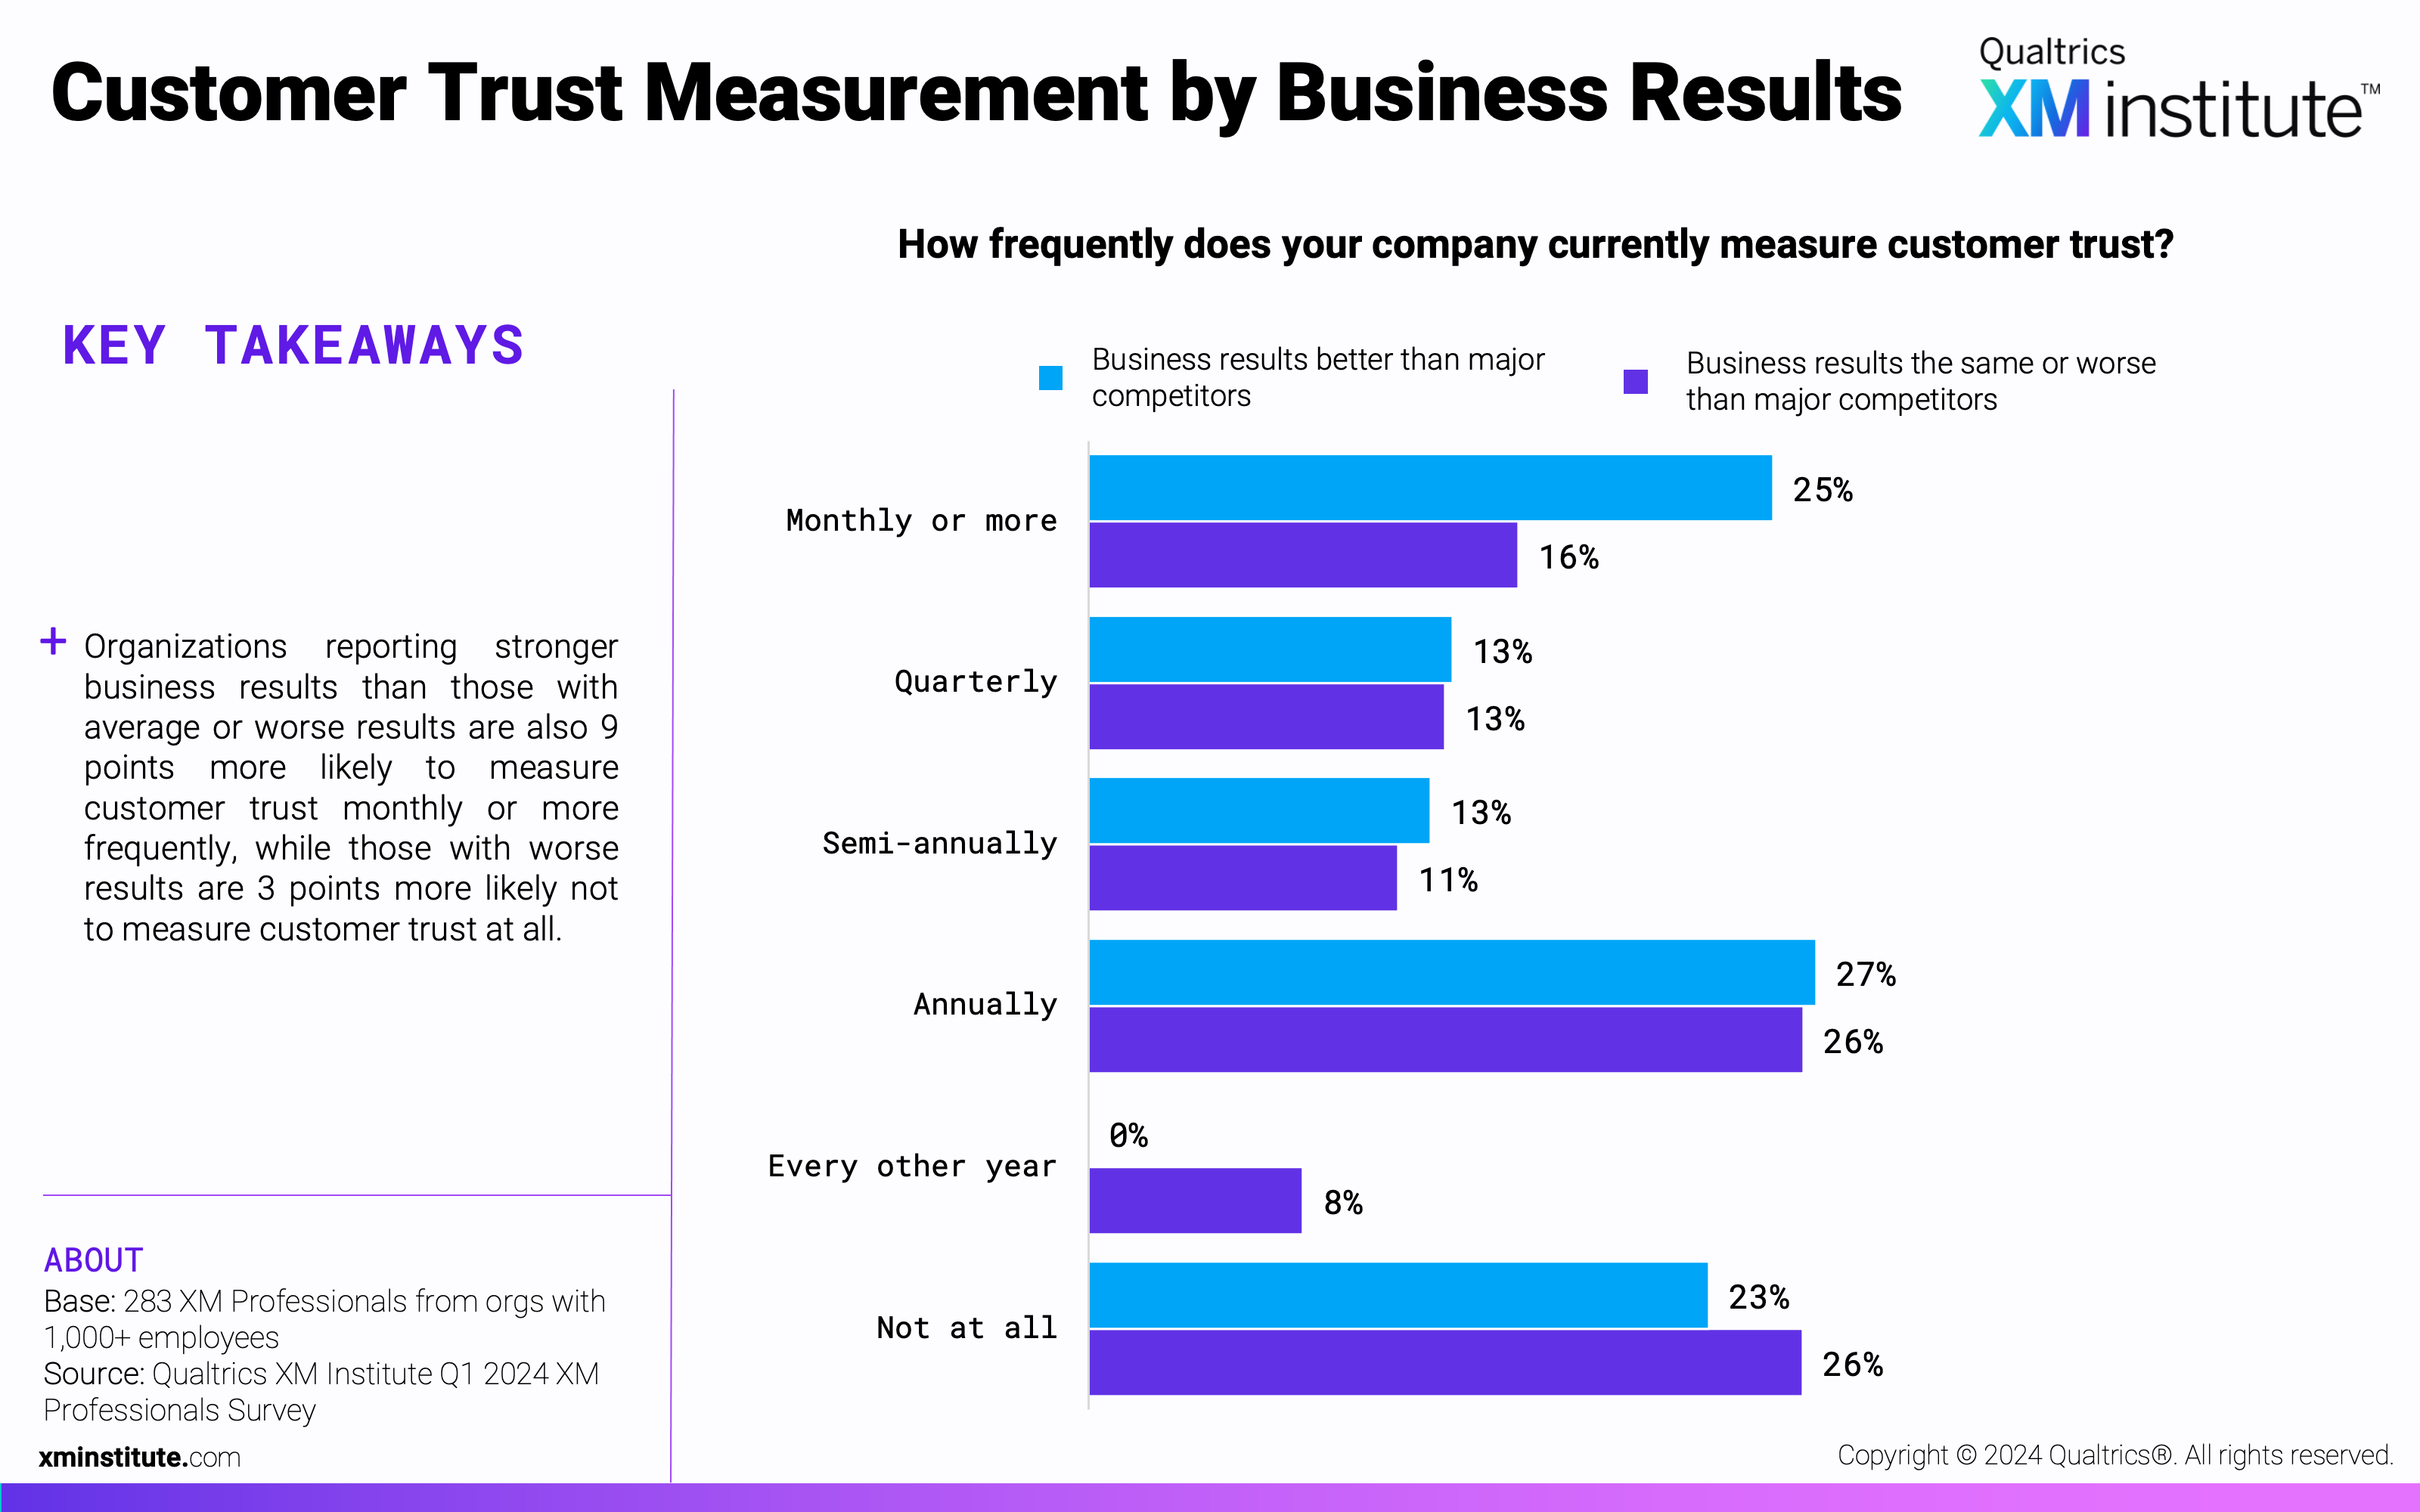 This chart shows how much respondents' organizations currently measure customer trust according to their business results. 